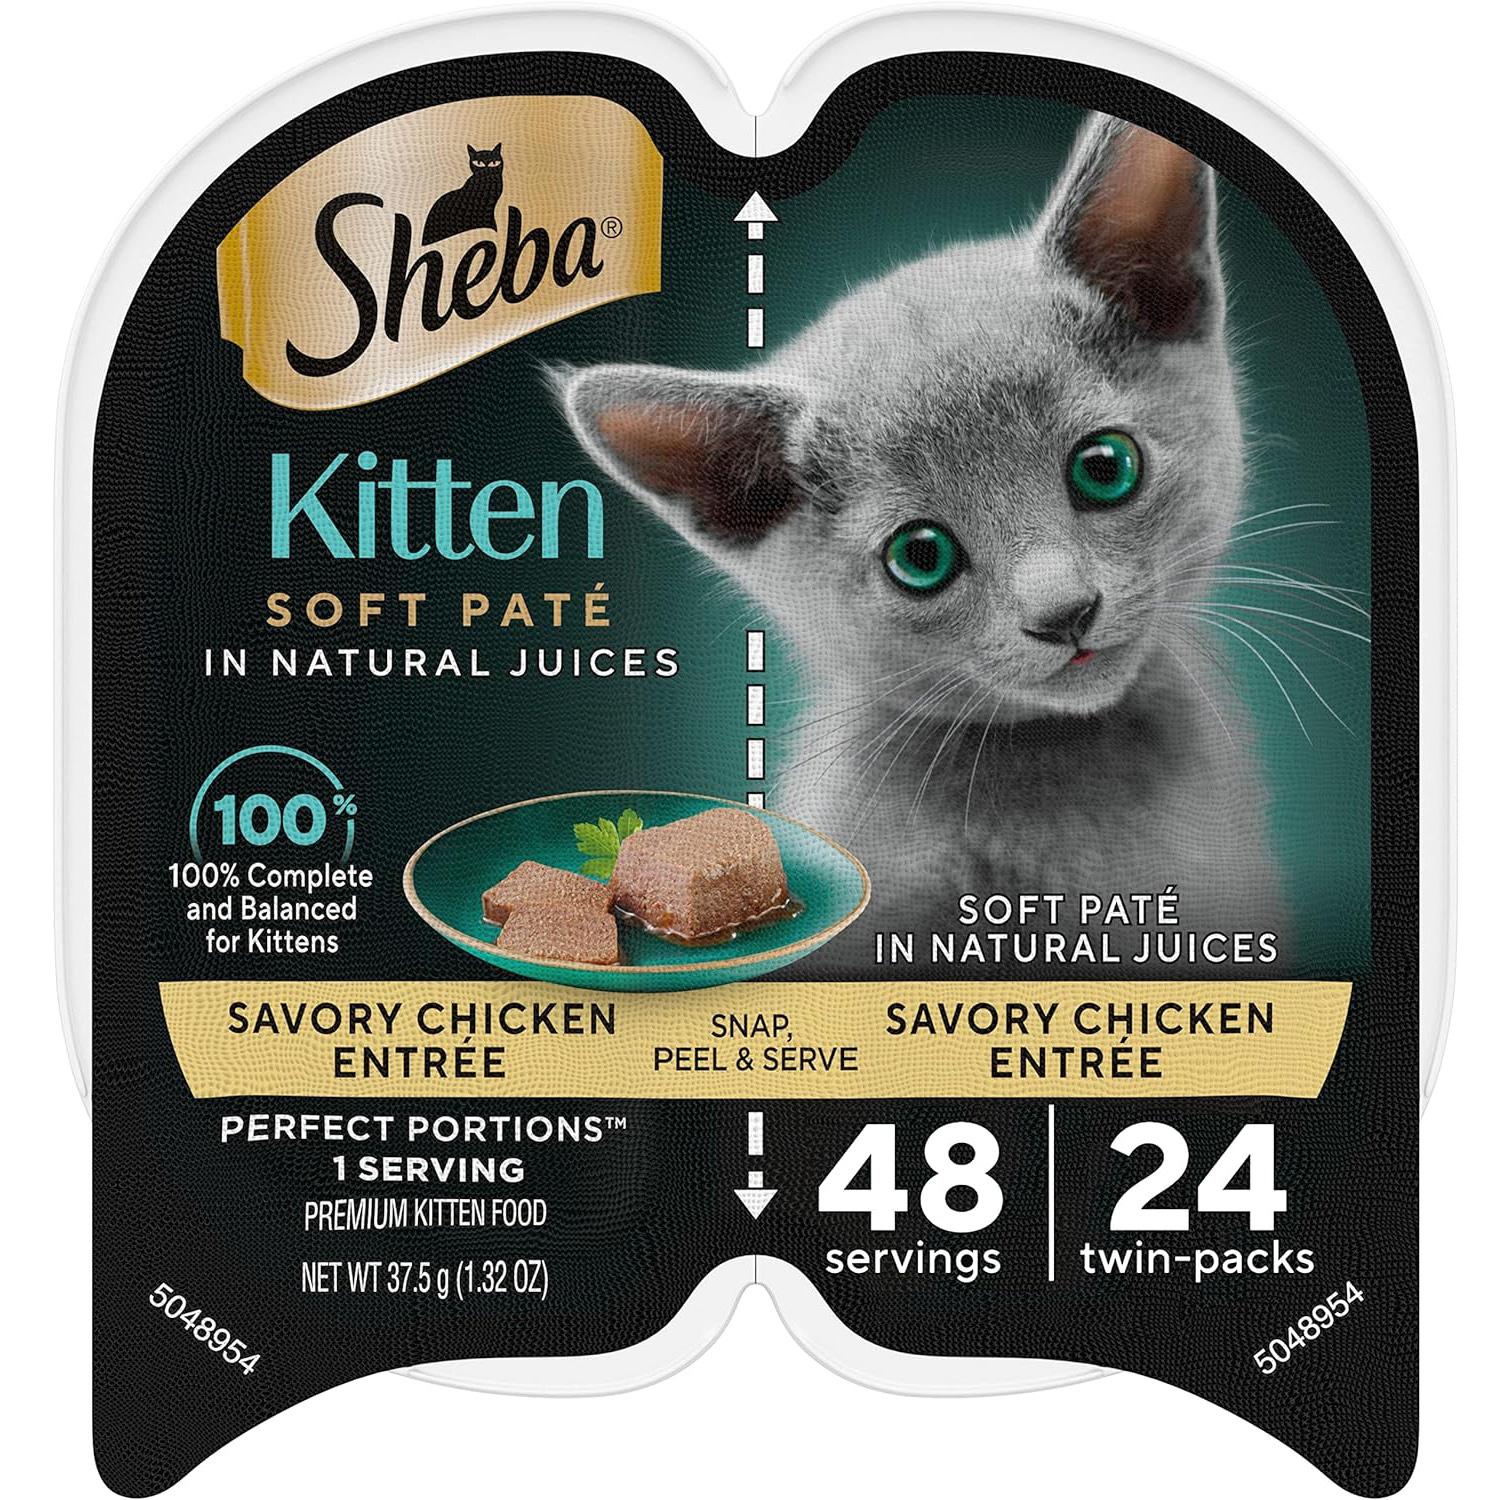 Sheba Perfect Portions Cuts in Gravy Wet Cat Food Trays 24 Pack for $16.68 Shipped